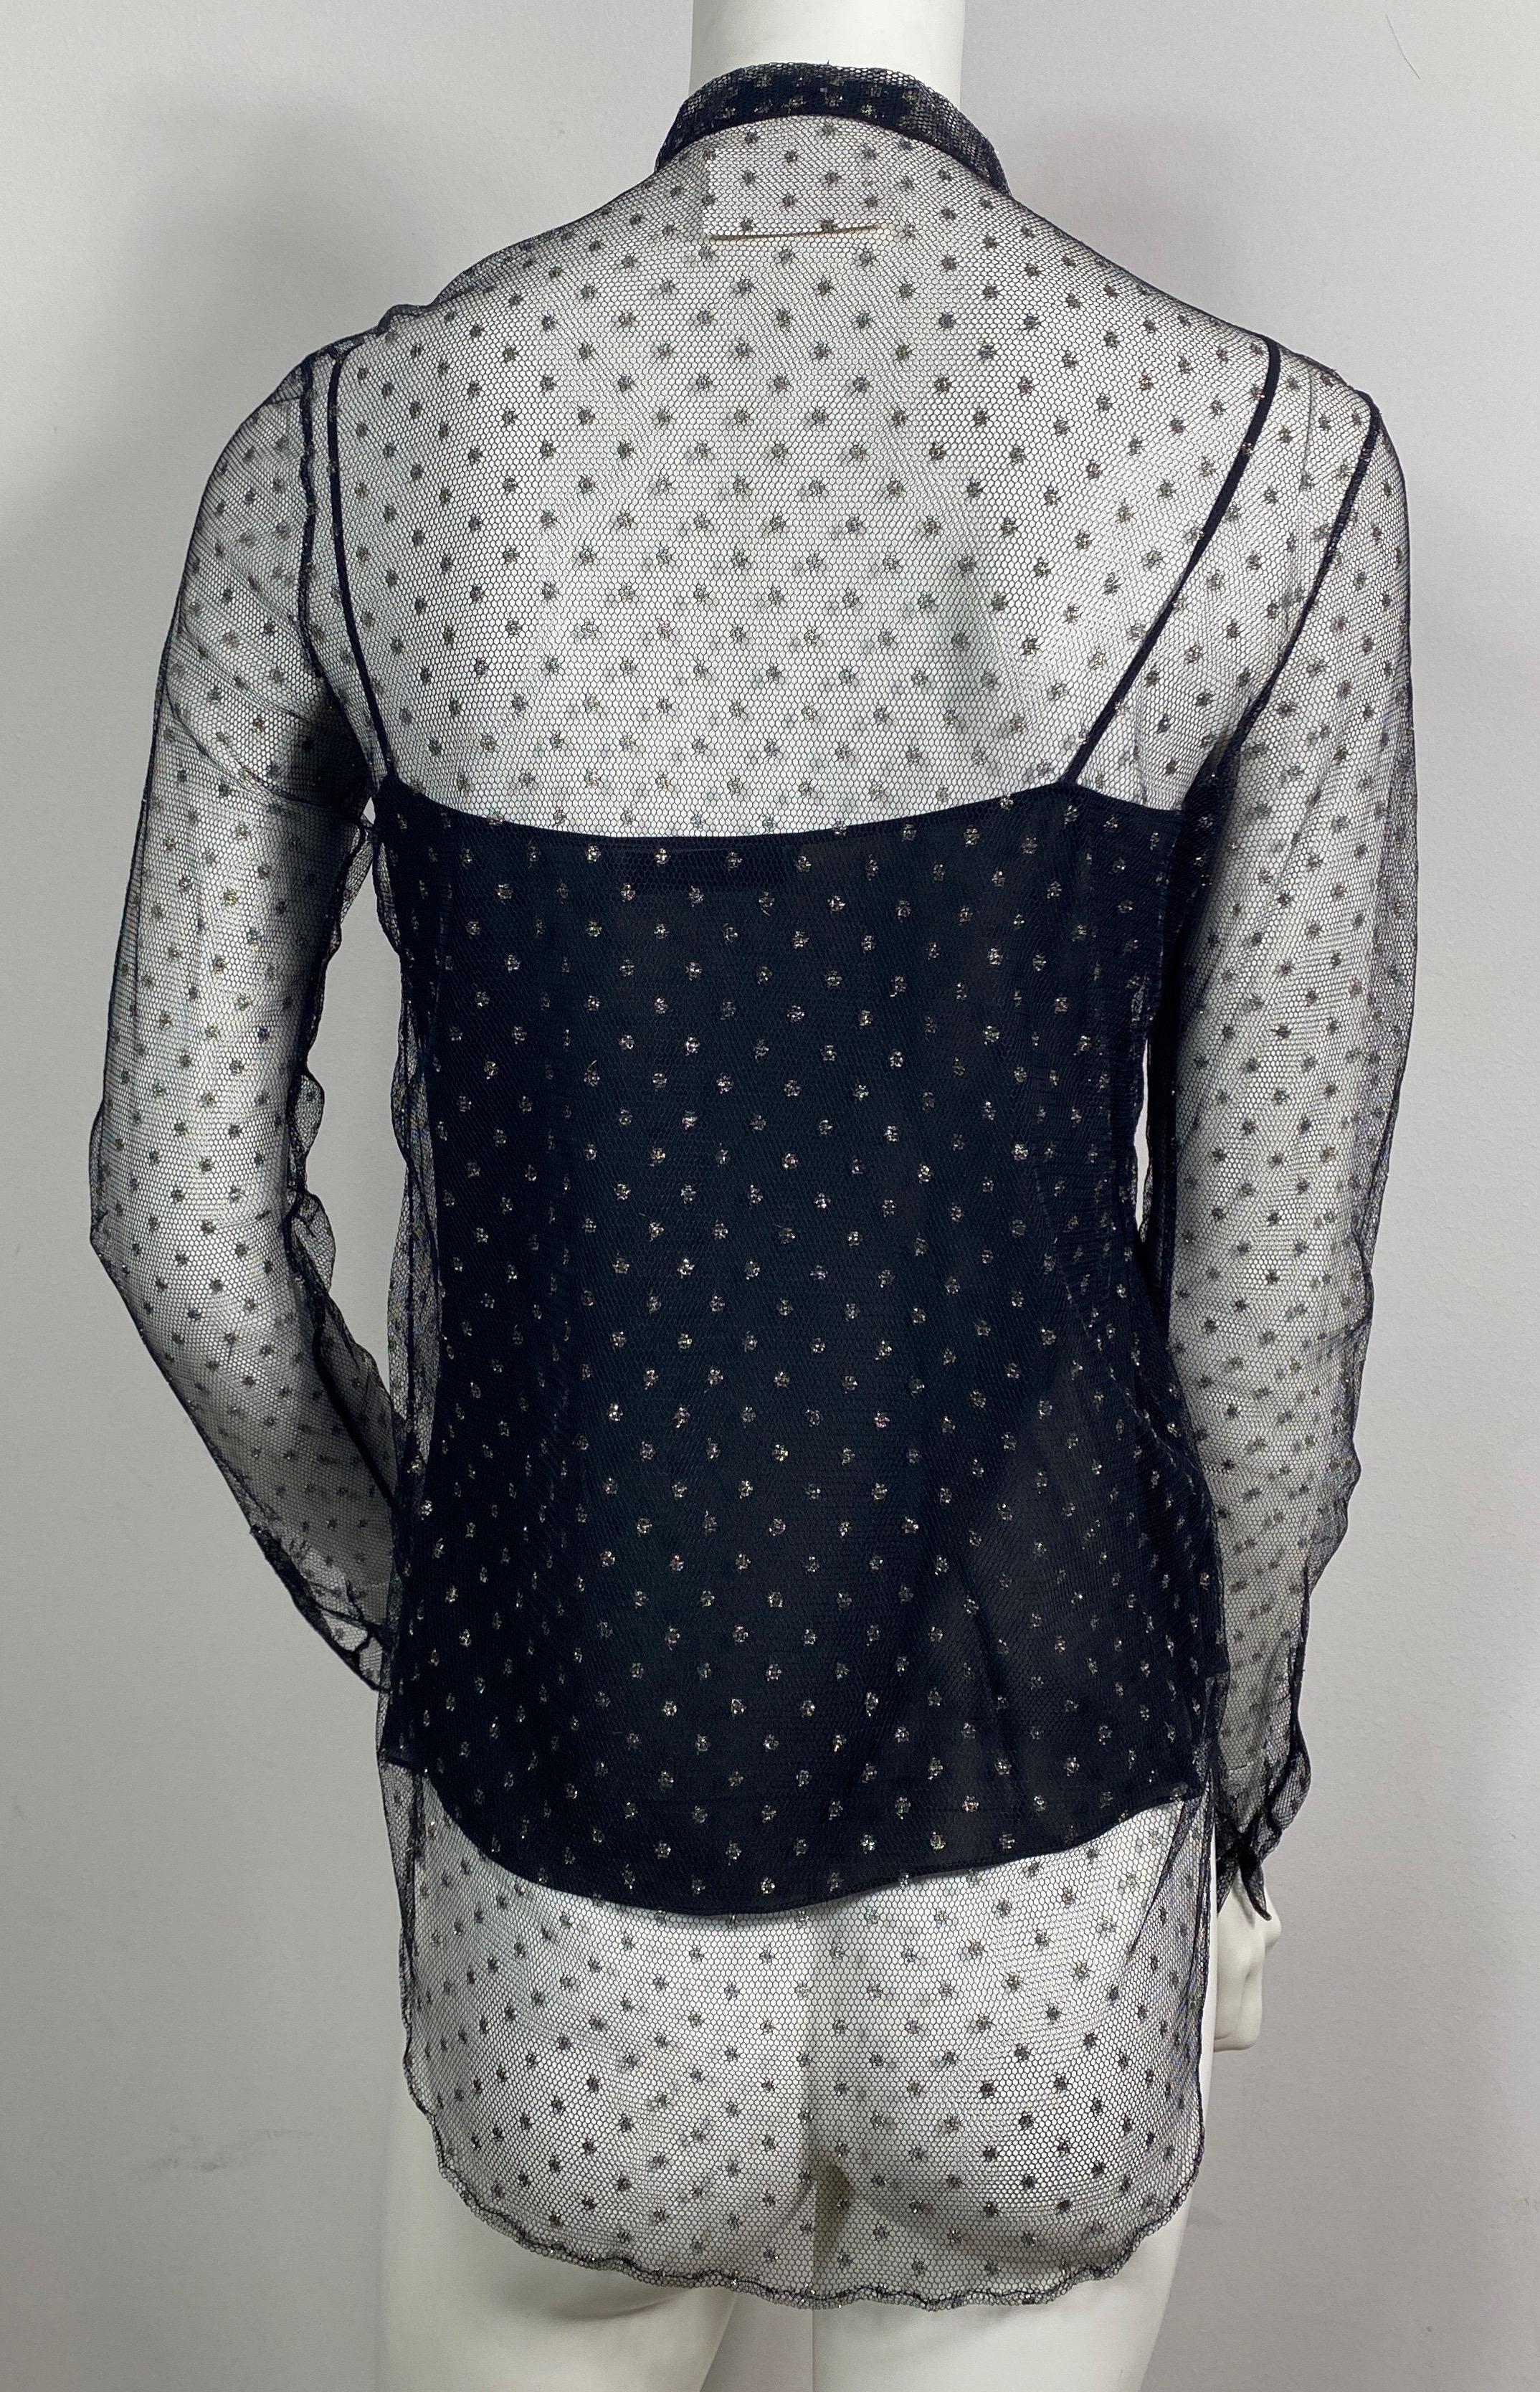 Christian Dior Black and Gold Mini Polka Dot Sheer Mesh Top - Size Small For Sale 7